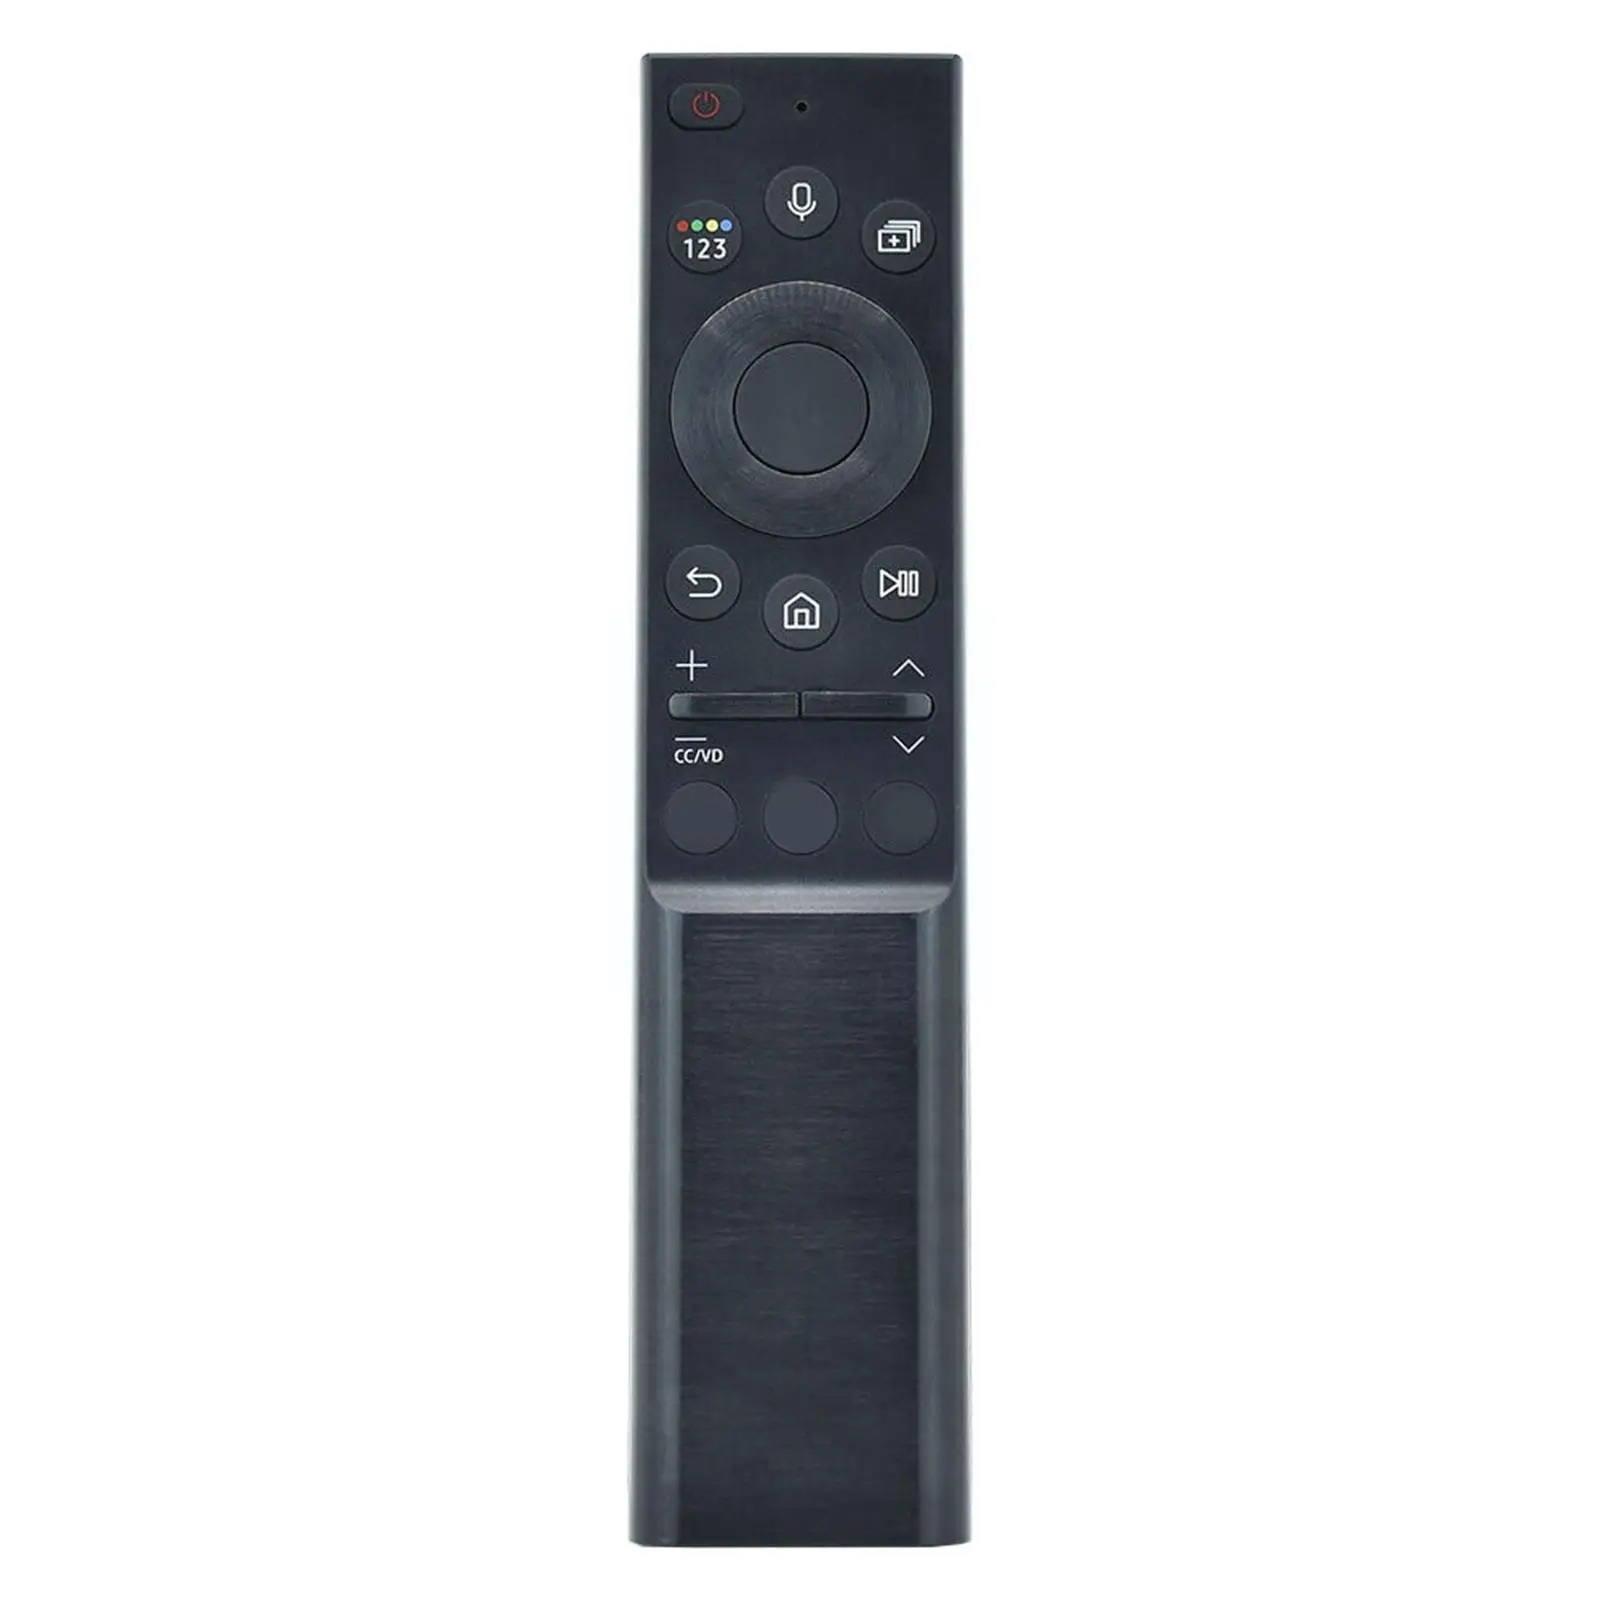 

Bn59-01357a Tv Voice Remote Control Changer For Qled Series Bluetooth Voice Remote Control 01357f F4t7